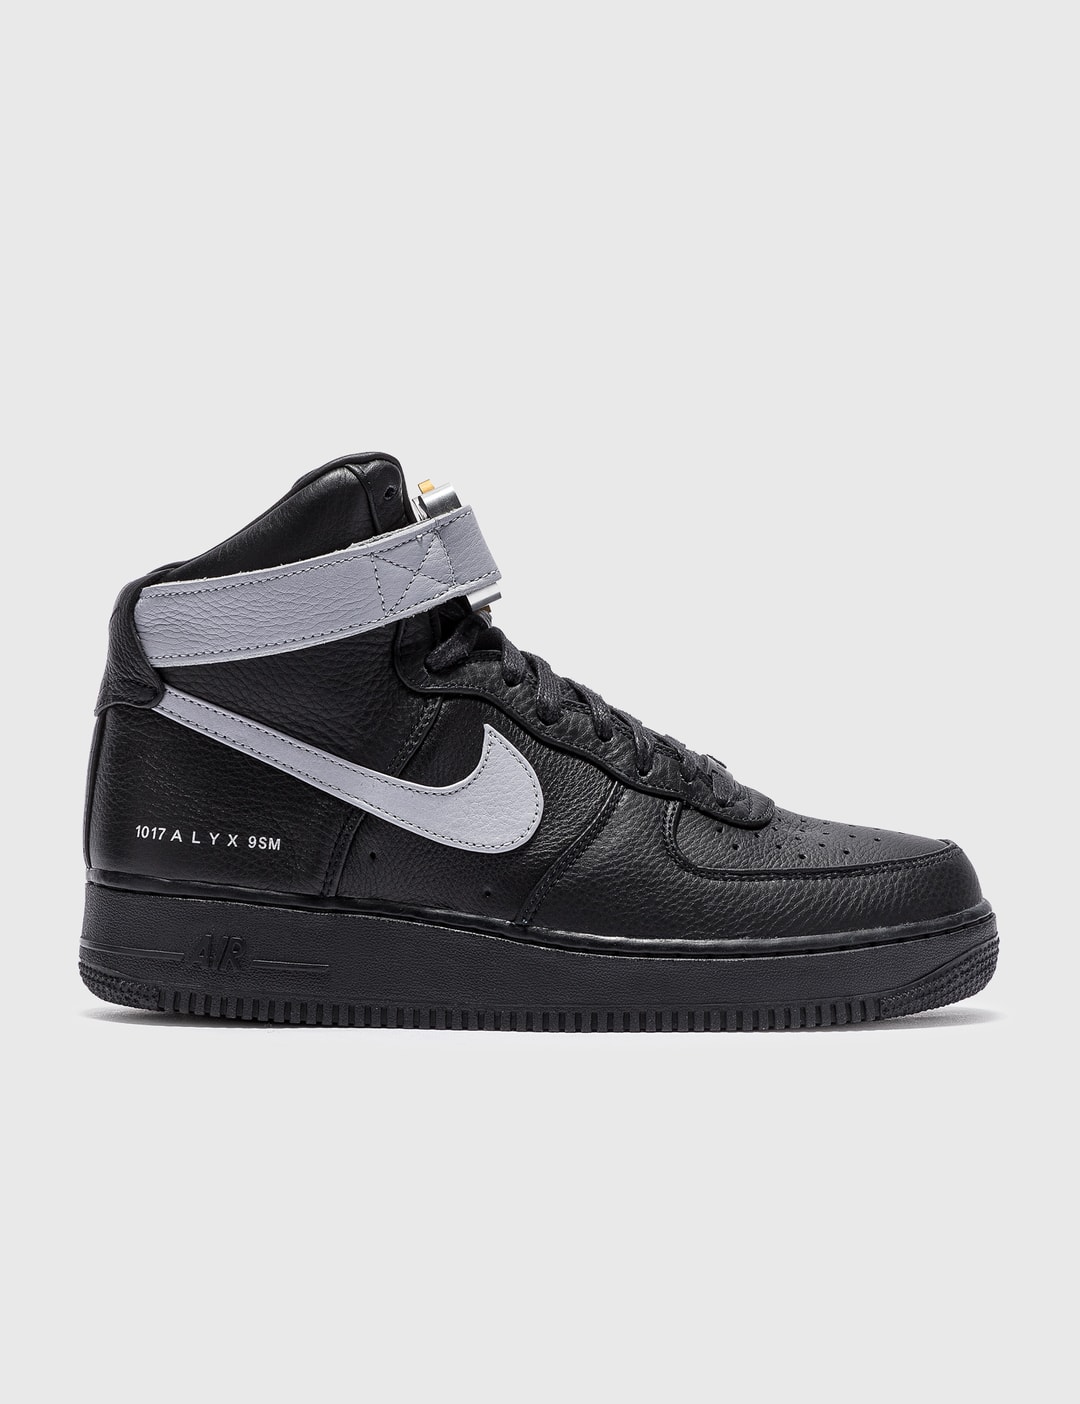 Nike - NIKE 1017 ALYX 9SM AIRFORCE 1 HBX - Globally Curated Fashion and by Hypebeast